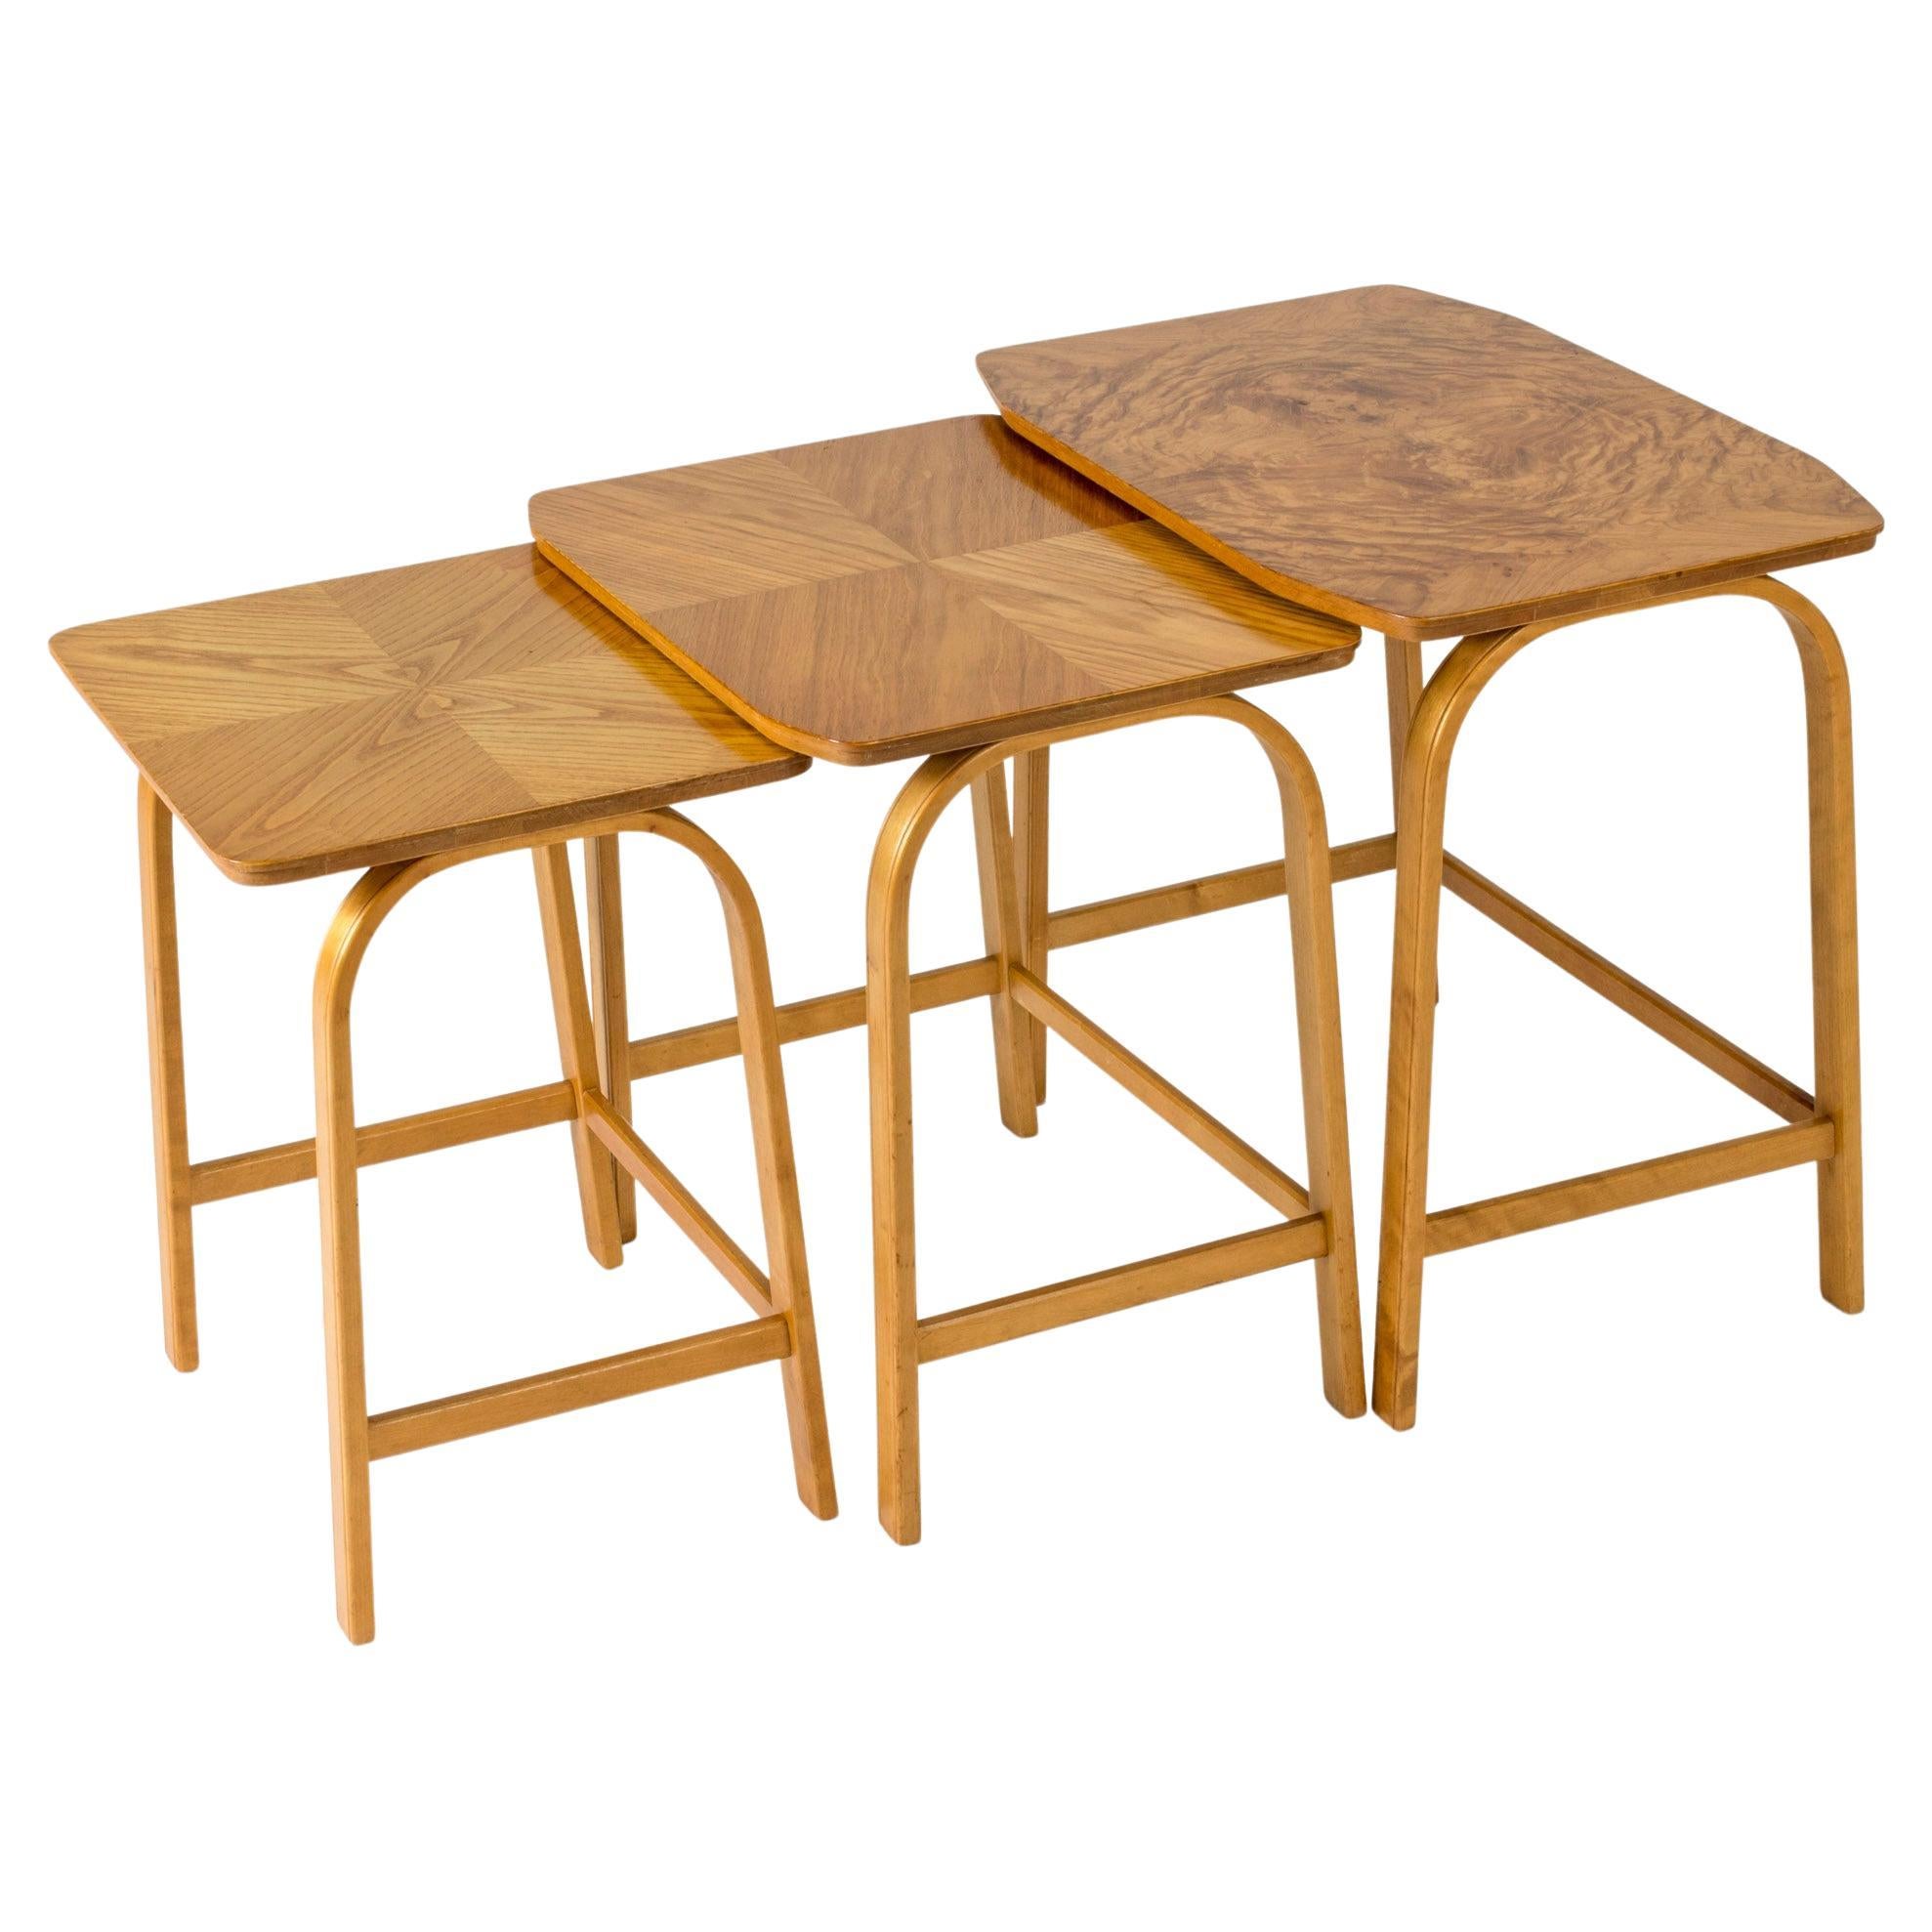 Modernist Birch Nesting Tables by Axel Larsson, Sweden, 1930s For Sale